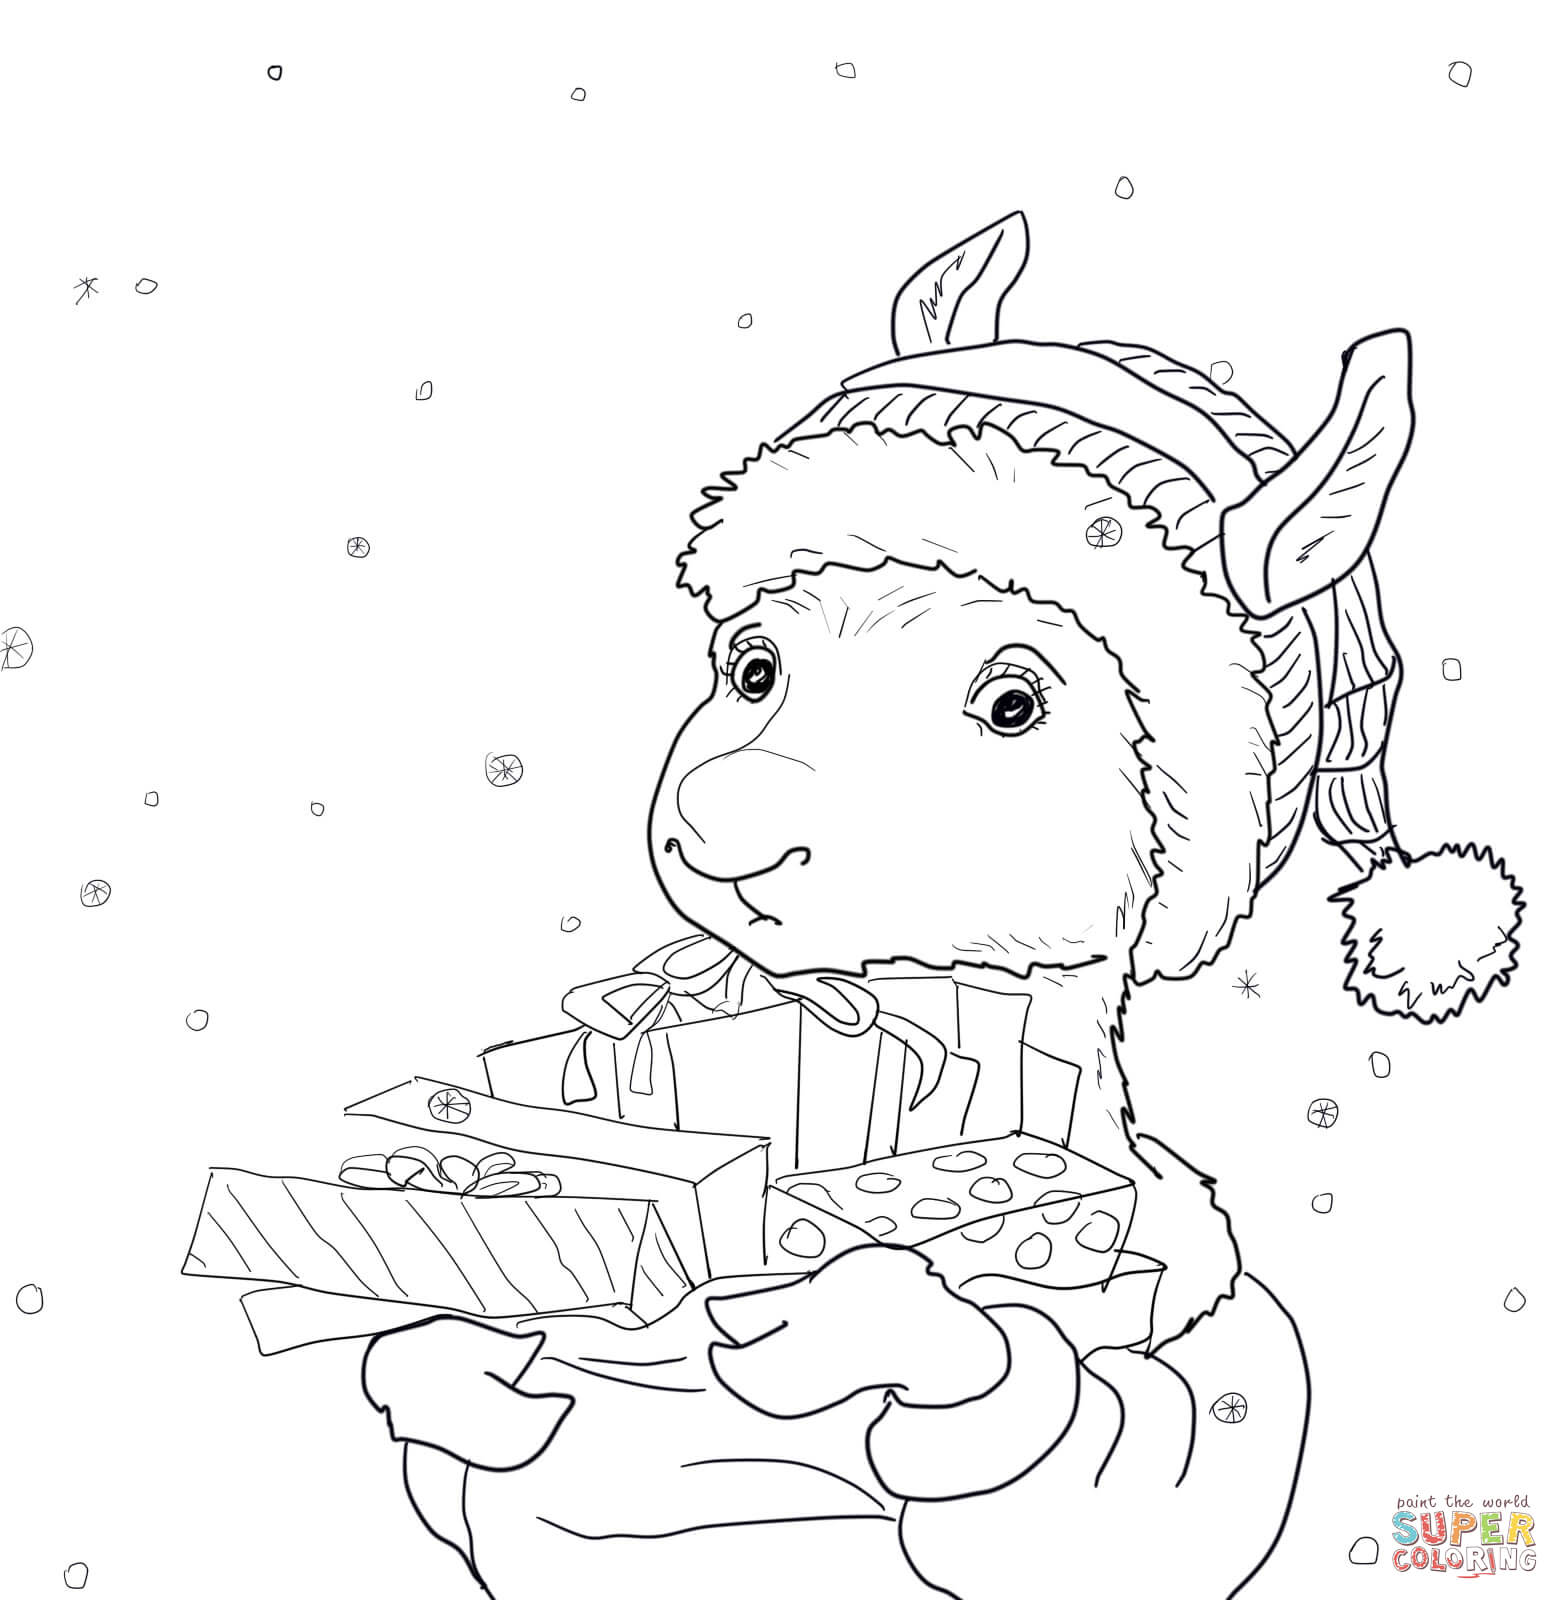 Llama coloring pages to download and print for free